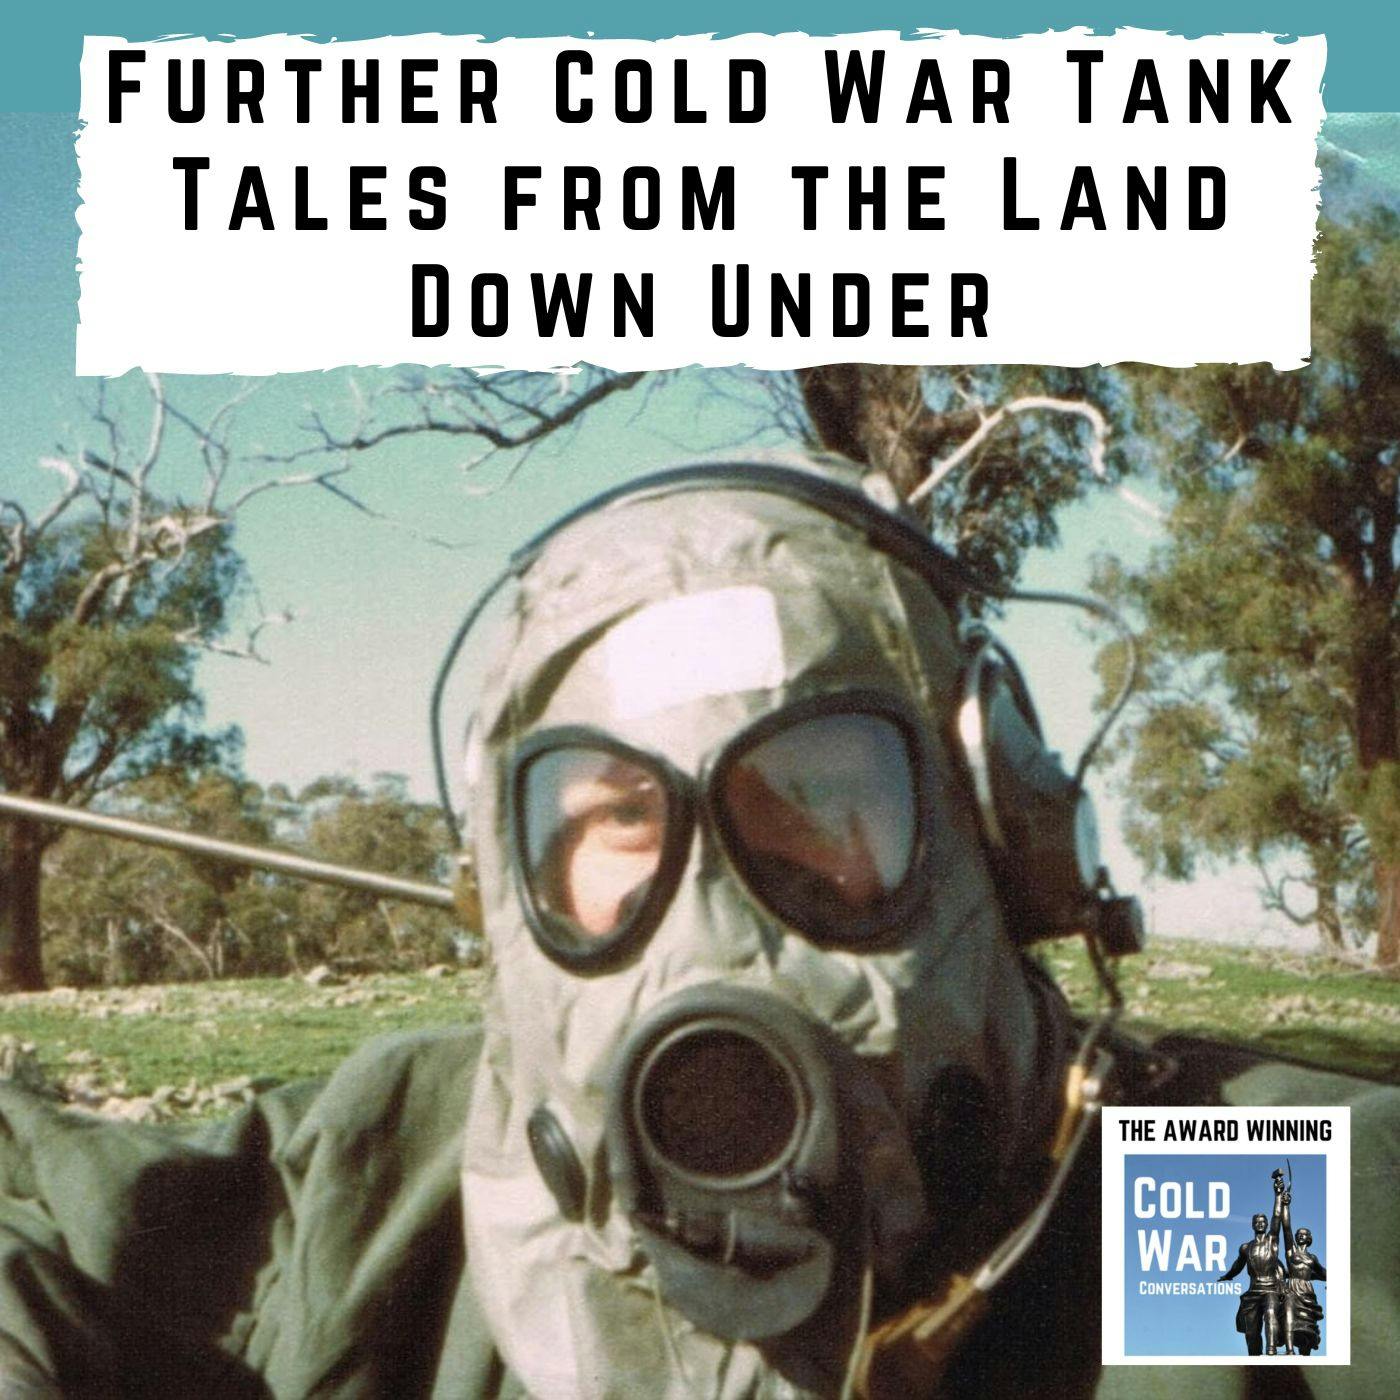 Further Cold War Tank Tales from the Land Down Under (324)